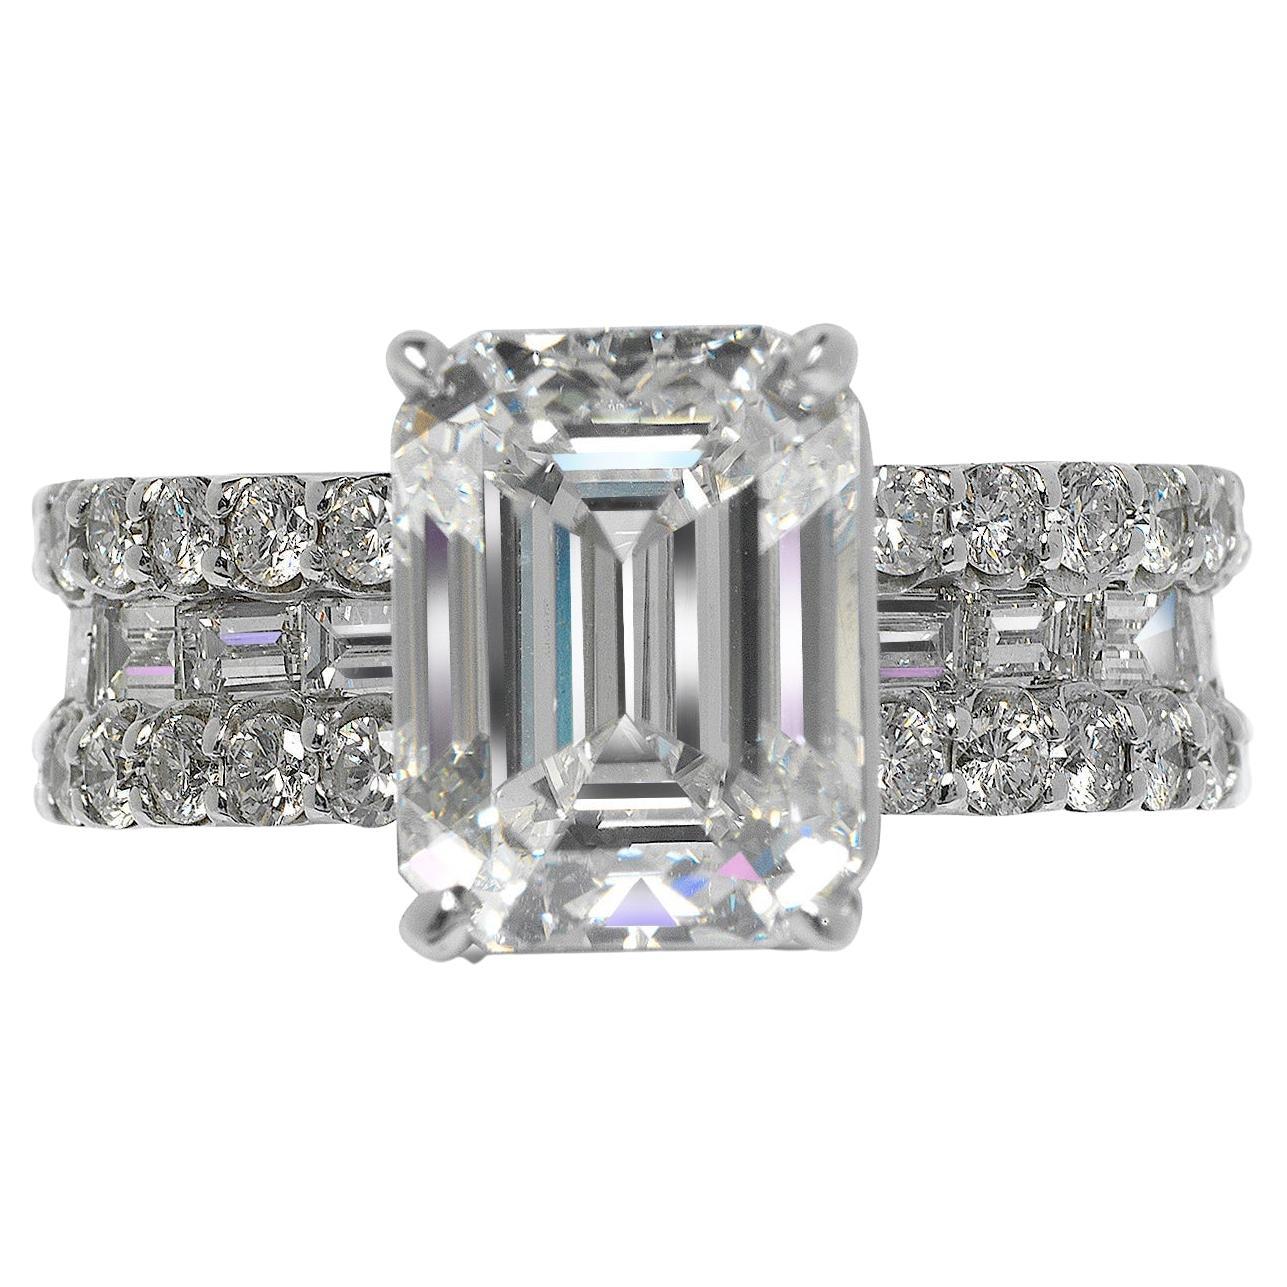 7 Carat Emerald Cut Diamond Engagement Ring GIA Certified H VVS1 For Sale